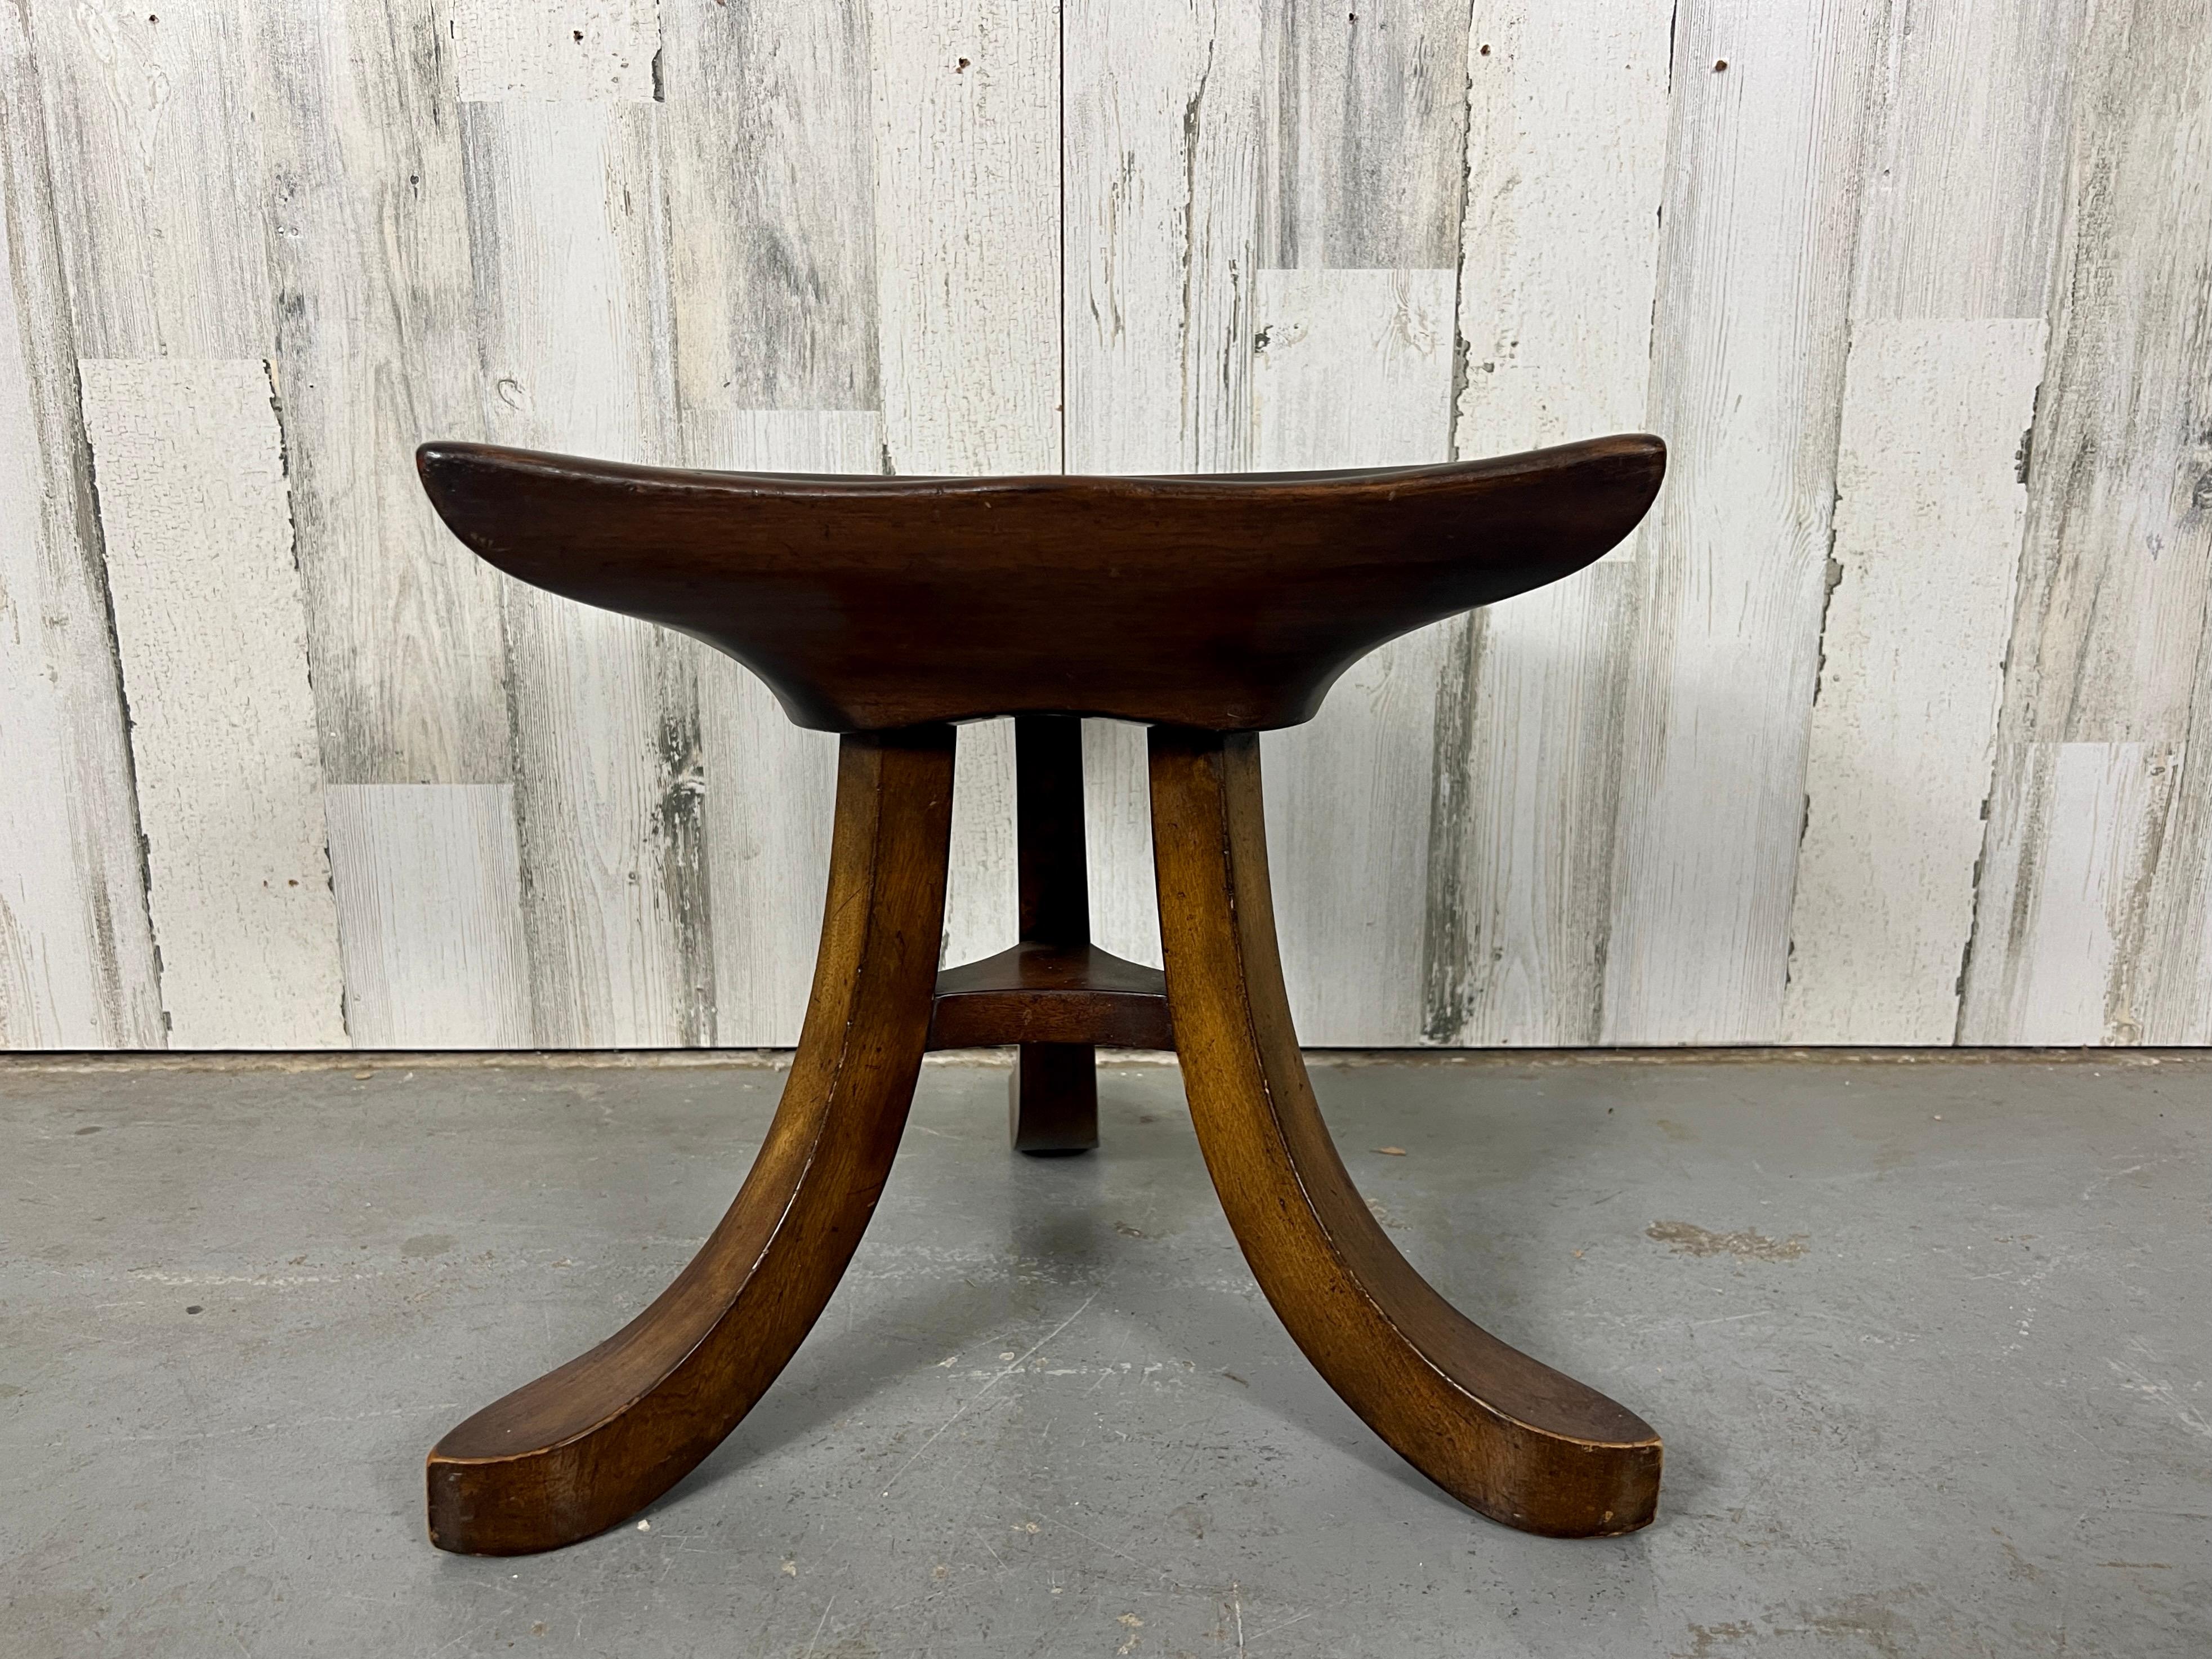 Sculpted Mahogany Tripod Theben Stool after Adolf Loos In Good Condition For Sale In Denton, TX